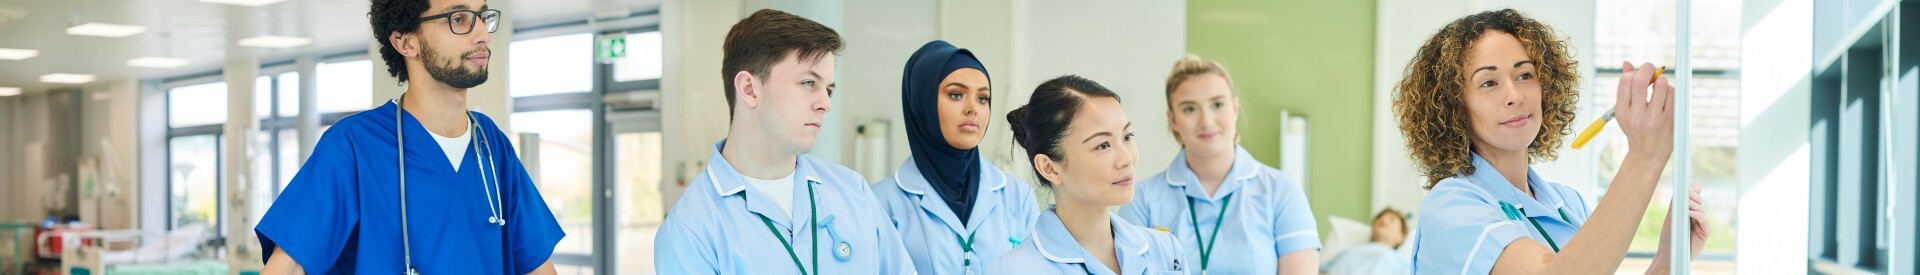 Clinical Staff Member Educating Colleagues